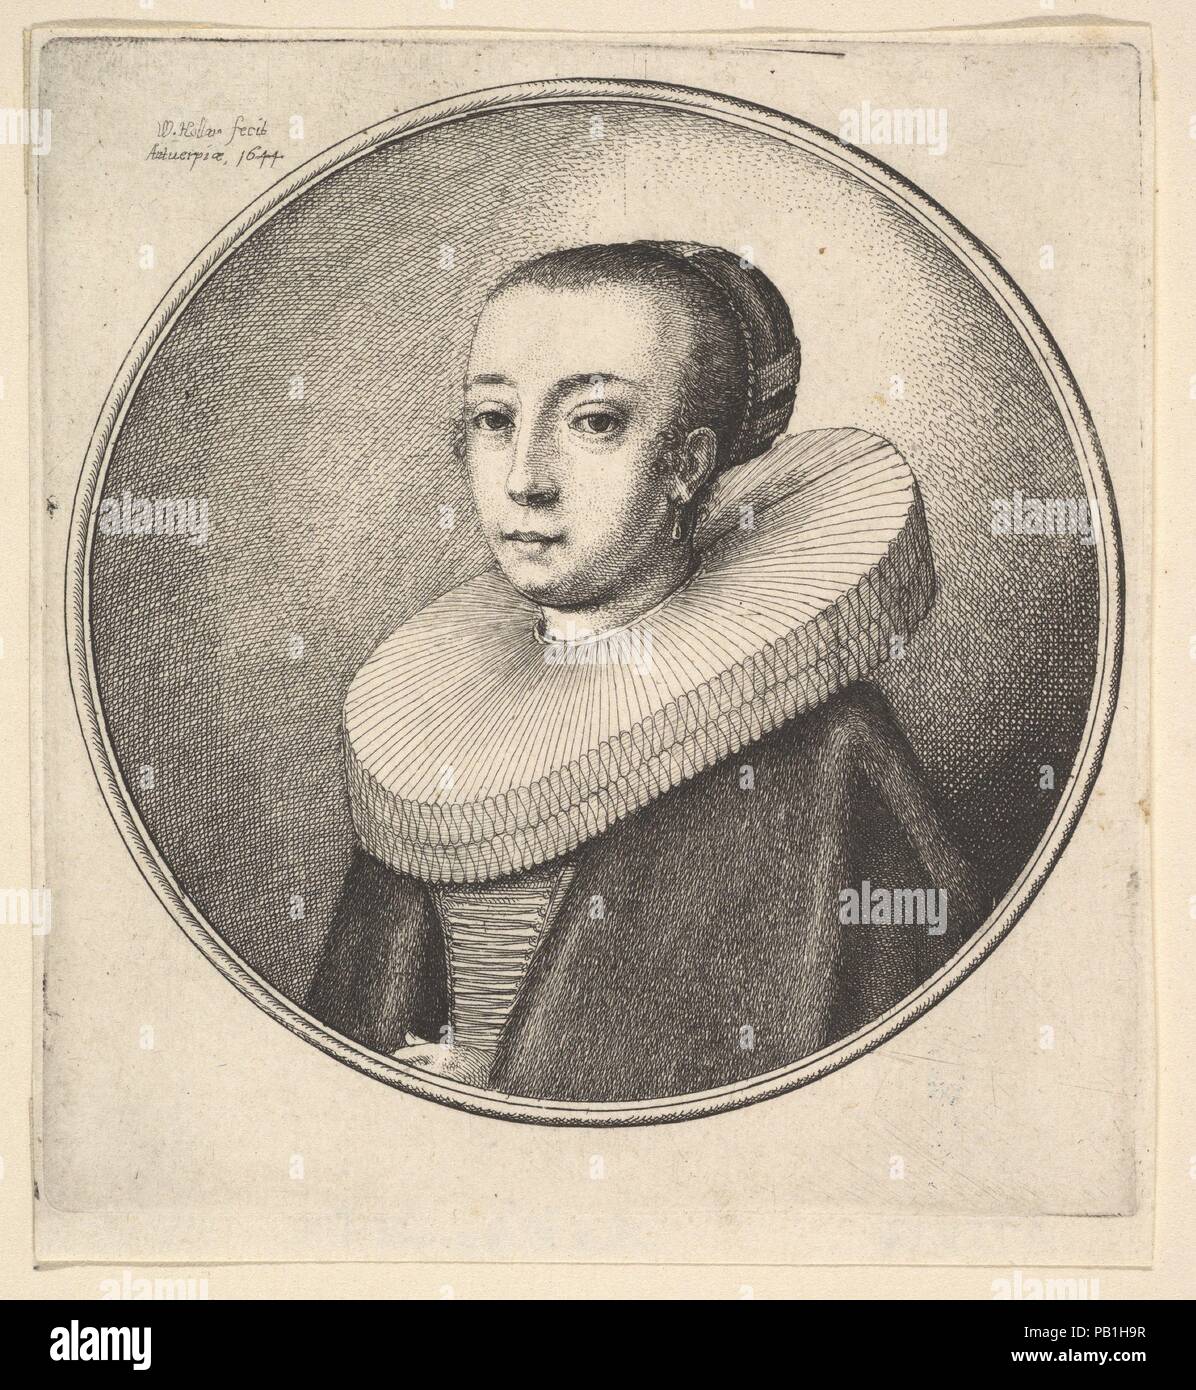 Woman with circular lace ruff. Artist: Wenceslaus Hollar (Bohemian, Prague 1607-1677 London). Dimensions: Plate: 4 × 3 3/4 in. (10.2 × 9.6 cm)  Sheet: 4 1/4 x 3 13/16 in. (10.8 x 9.7 cm). Series/Portfolio: Women's heads framed in roundels  Thirteen plates. Date: 1644.  Woman shown bust length within a roundel, her hair pulled back and covered by a net, wearing a round ruff and fur stole over a laced bodice. Museum: Metropolitan Museum of Art, New York, USA. Stock Photo